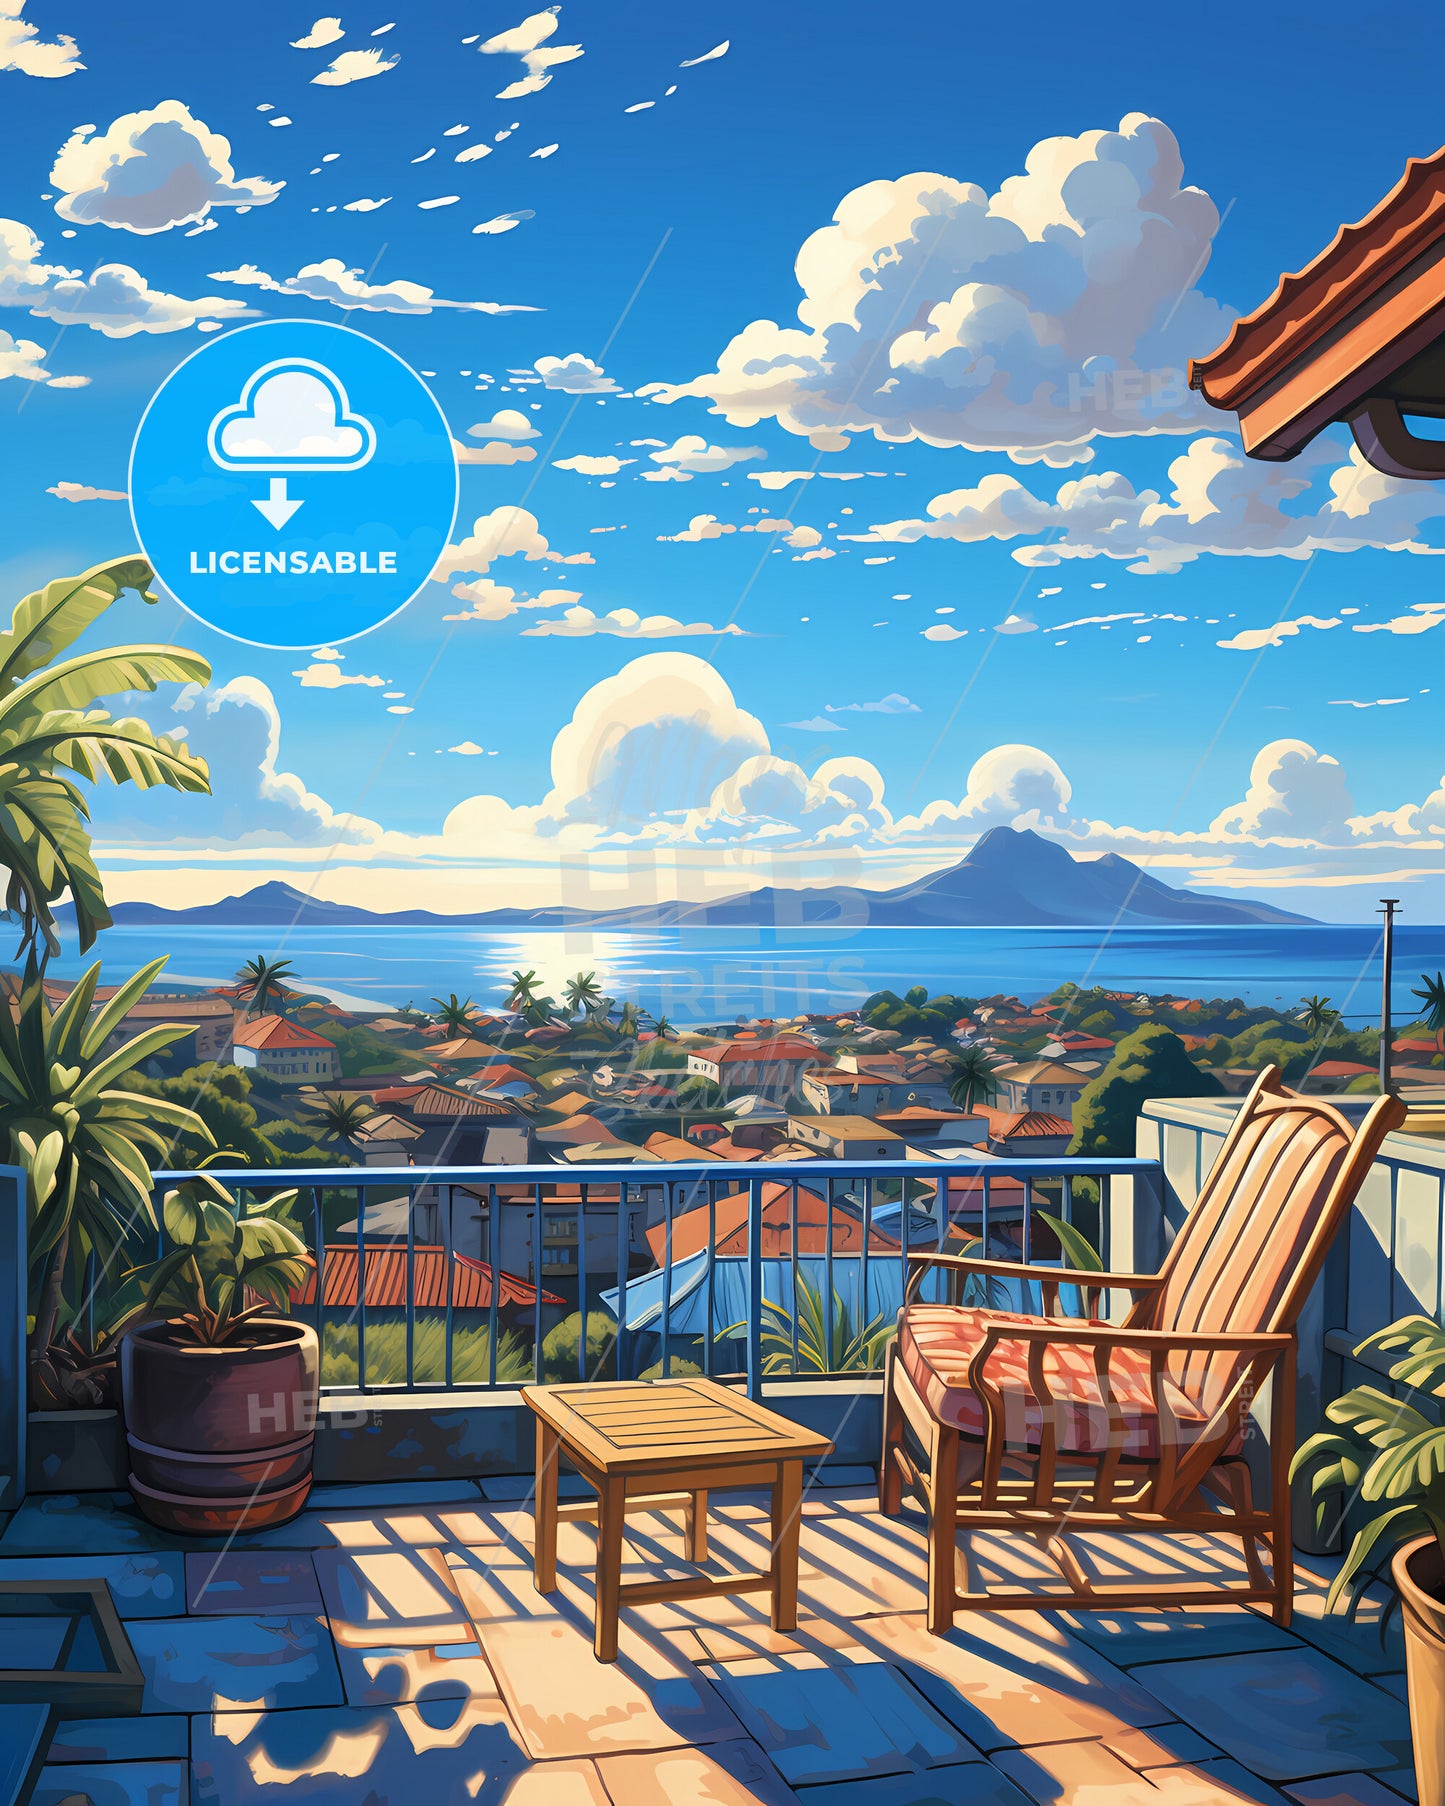 On The Roof Of Fiji, Republic Of Fiji - A Balcony With A View Of A City And Mountains